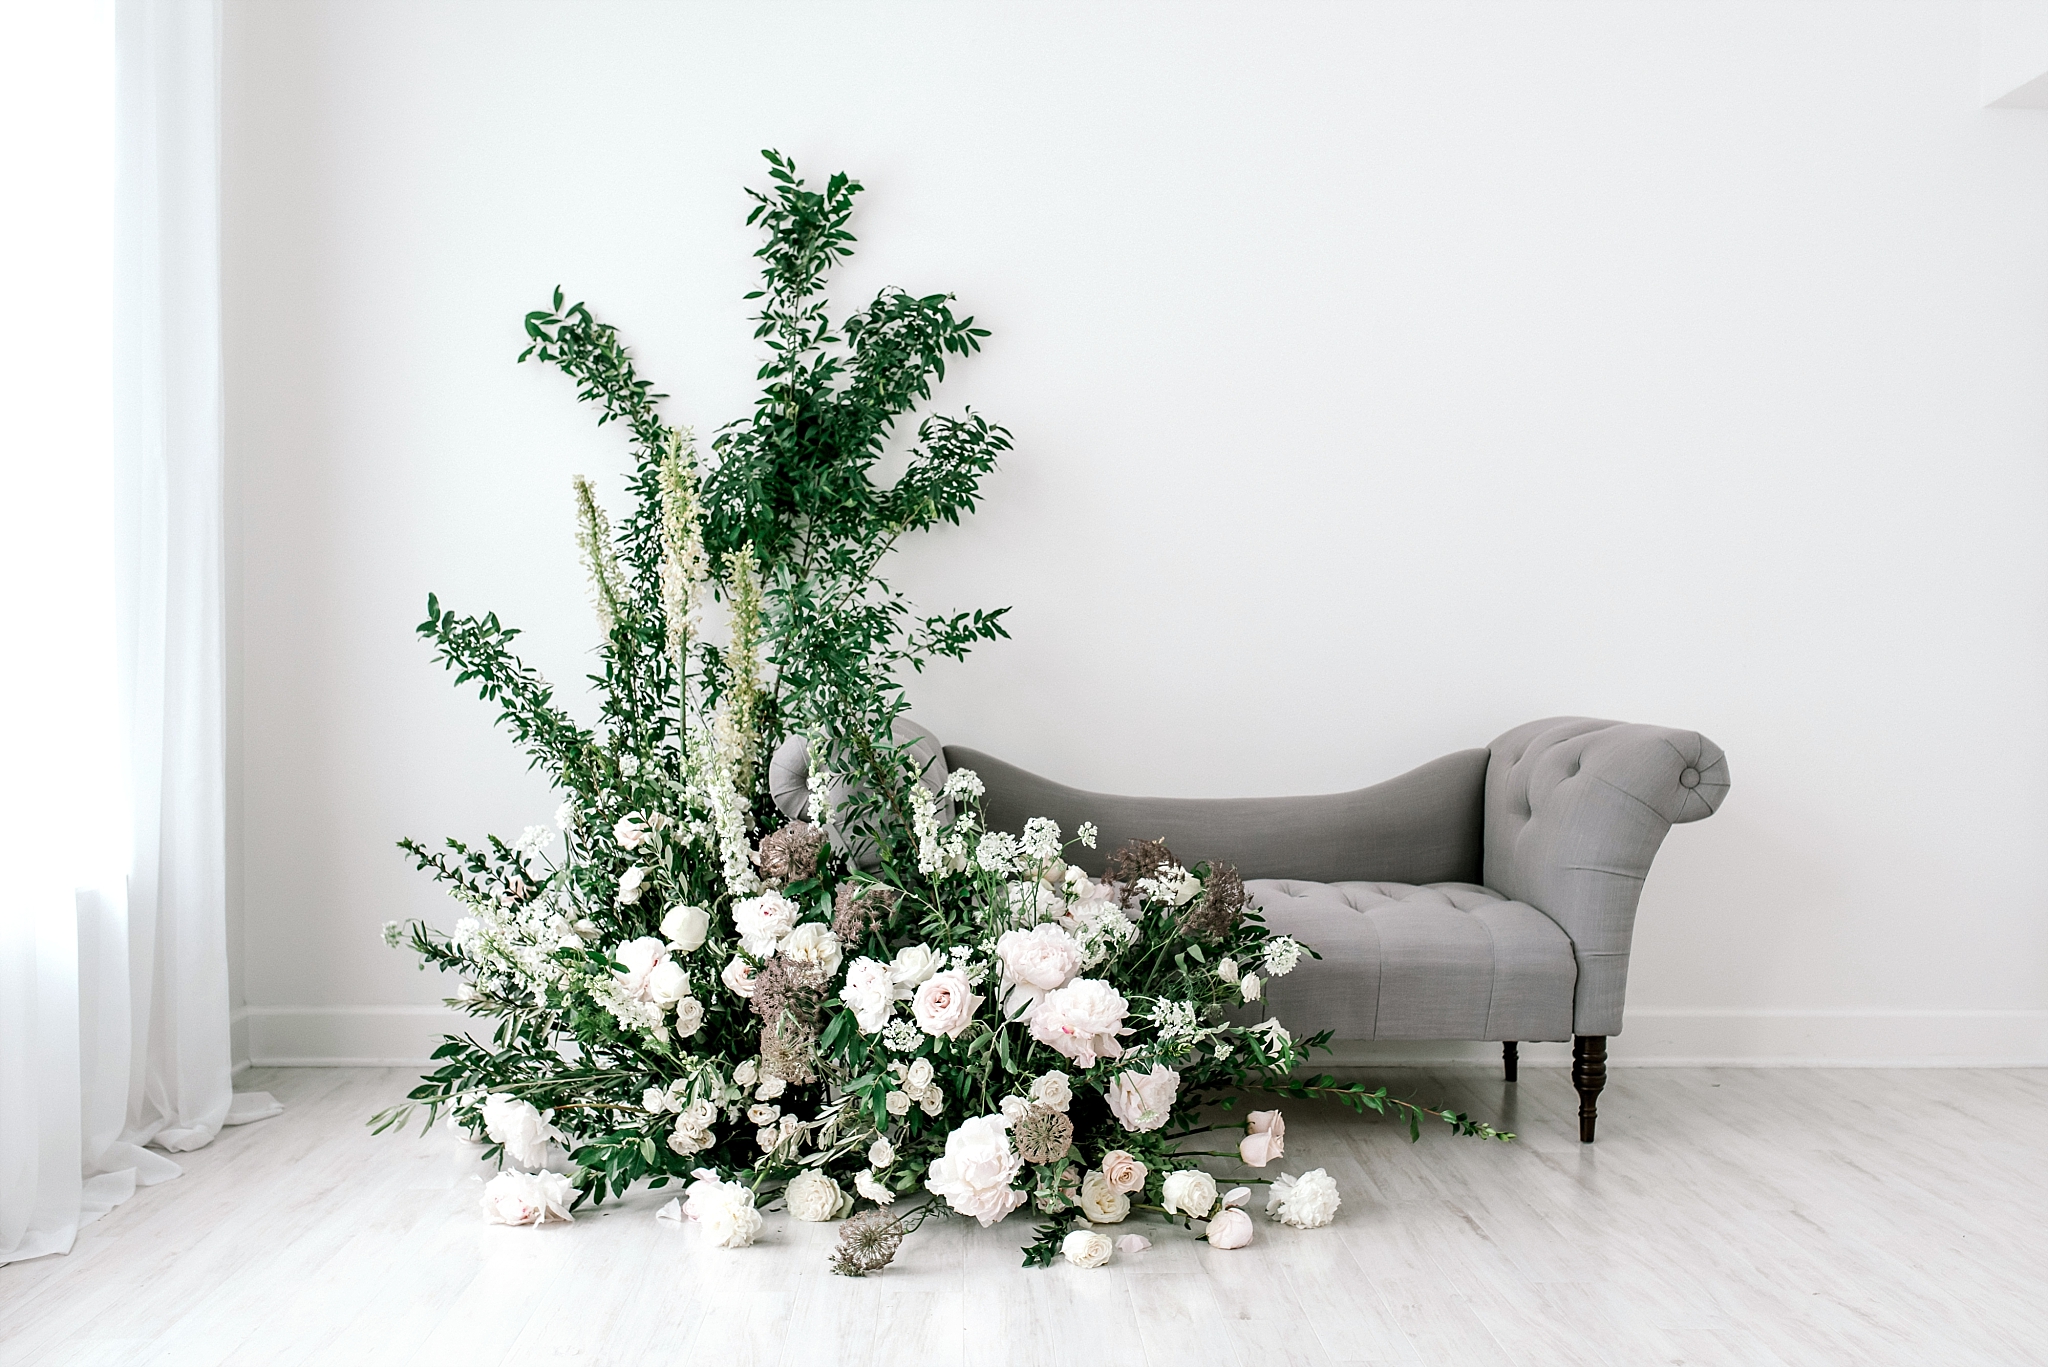 Greenery and white roses floral installation